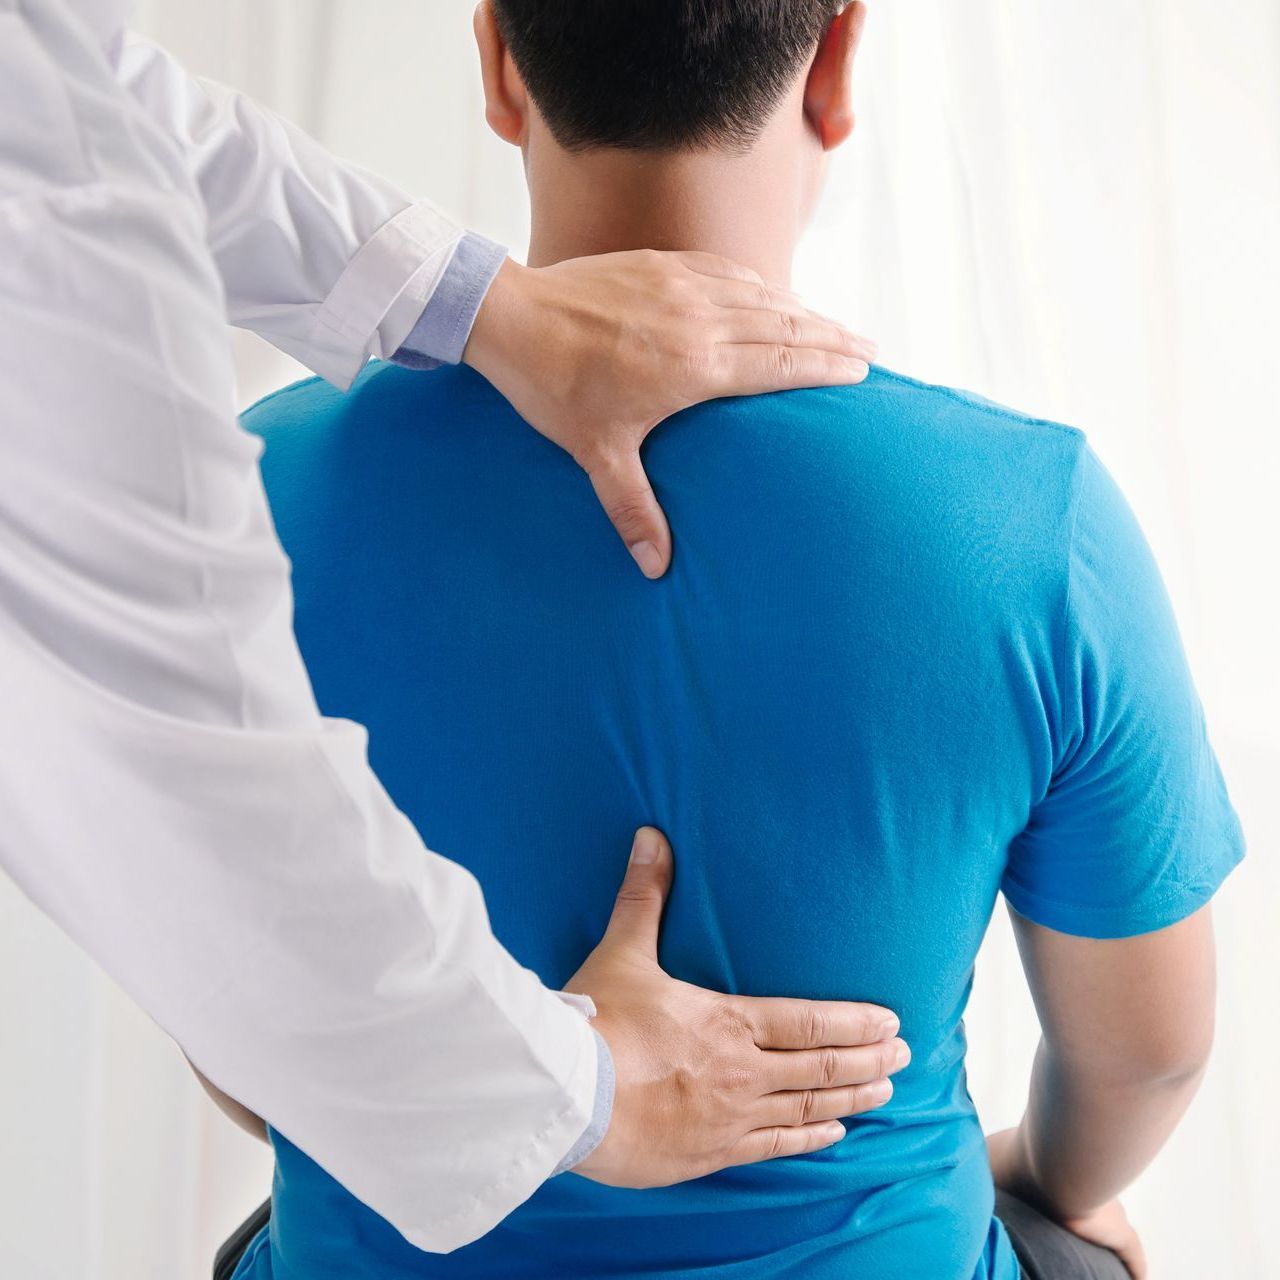 Doctor physiotherapist doing healing treatment on man's back.Back pain patient, treatment, medical doctor, massage therapist.office syndrome.